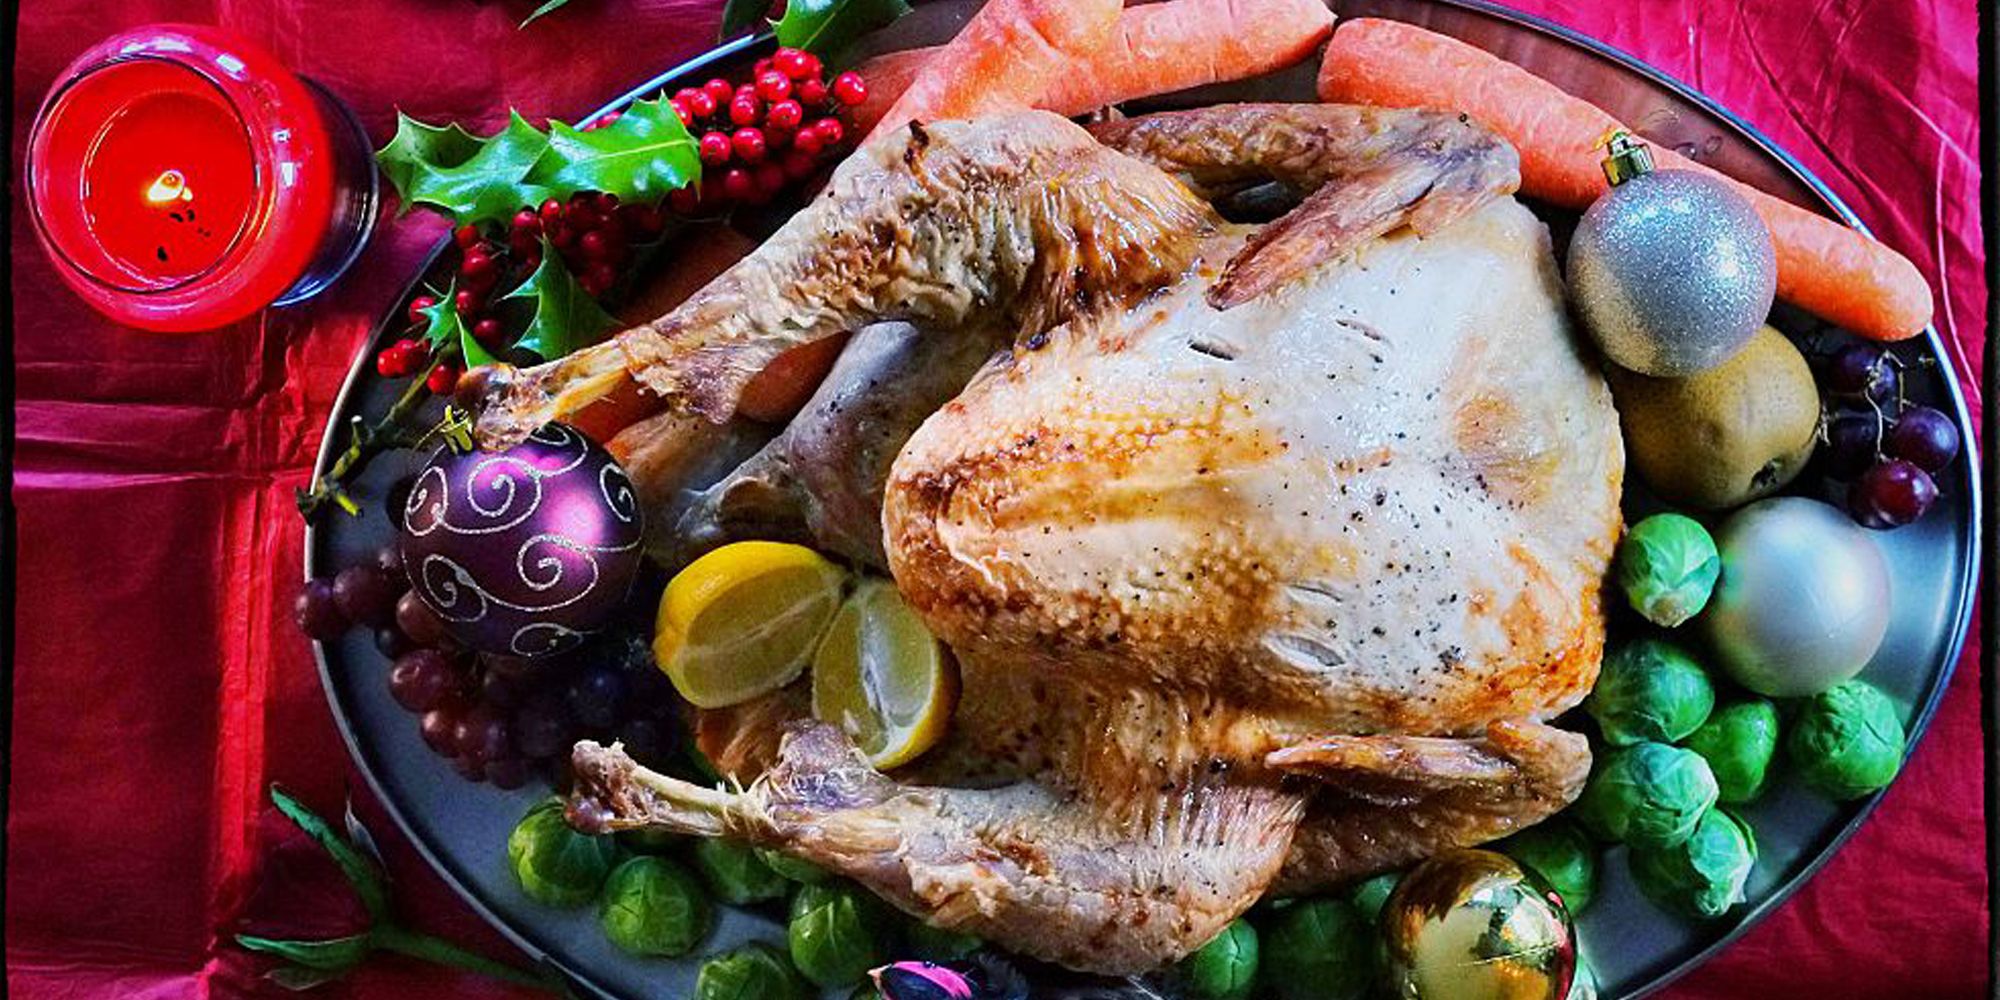 Top 15 English Christmas Foods How To Serve A British Holiday Dinner Kiviak is another popular dish, which is. top 15 english christmas foods how